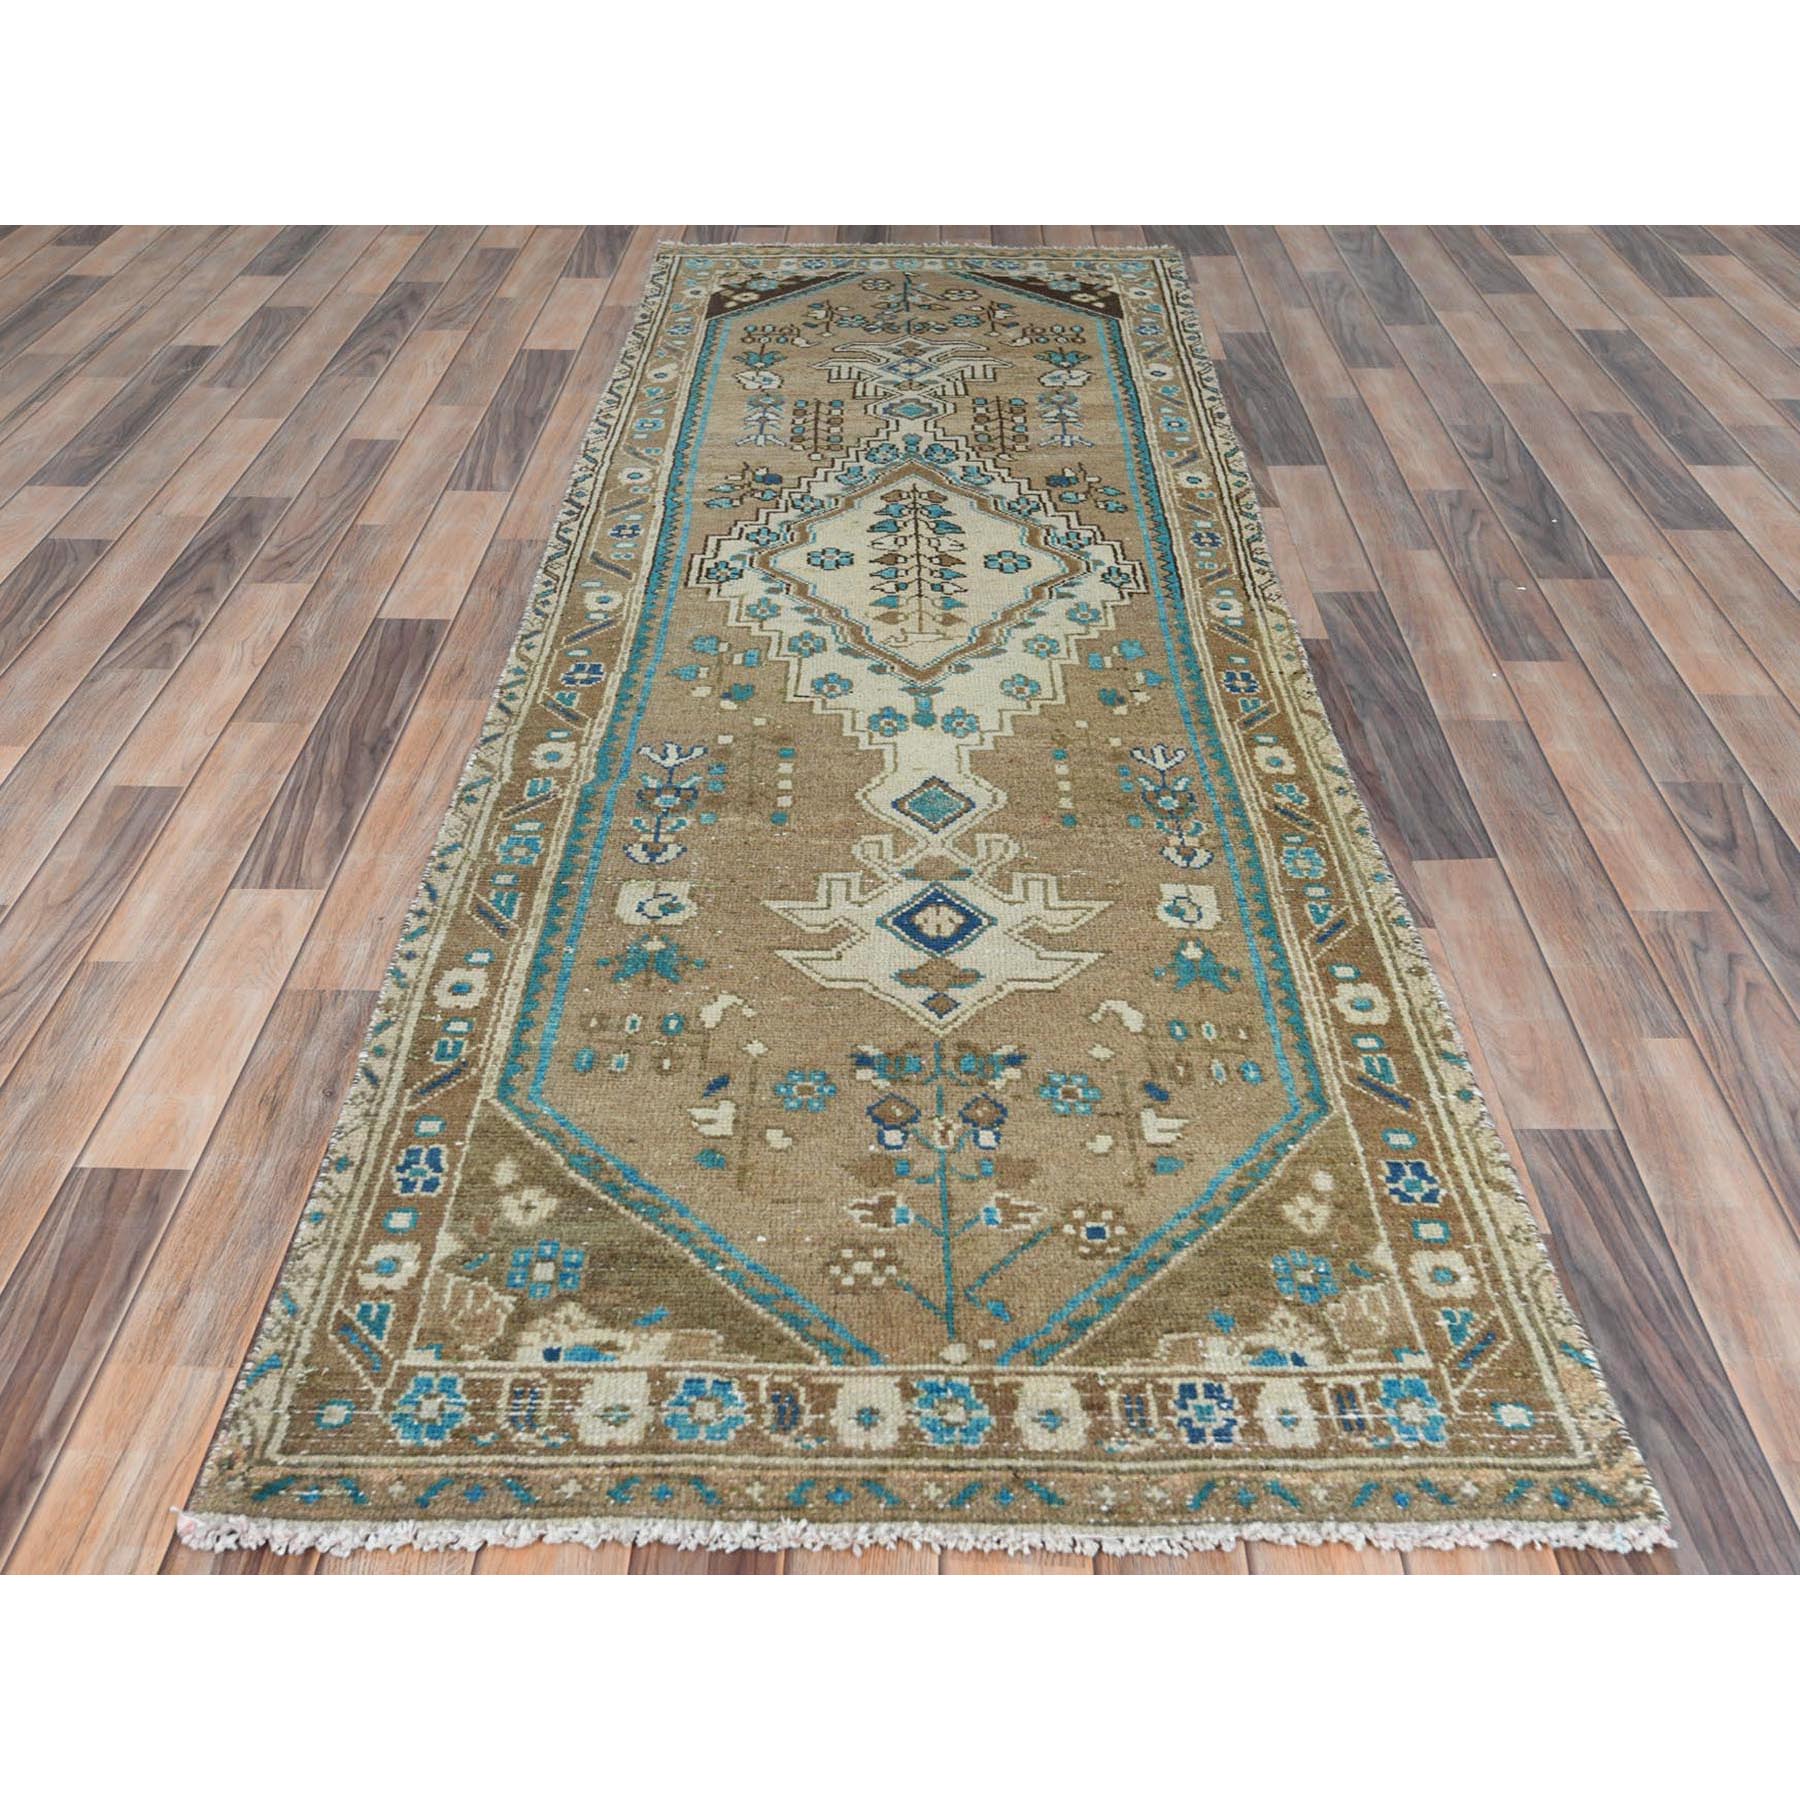 3'x9'4" Camel Hair Vintage Persian Hamadan with Unique Open Field Design, Sheared Low, Hand Woven Pure Wool, Distressed Wide Runner Oriental Rug 